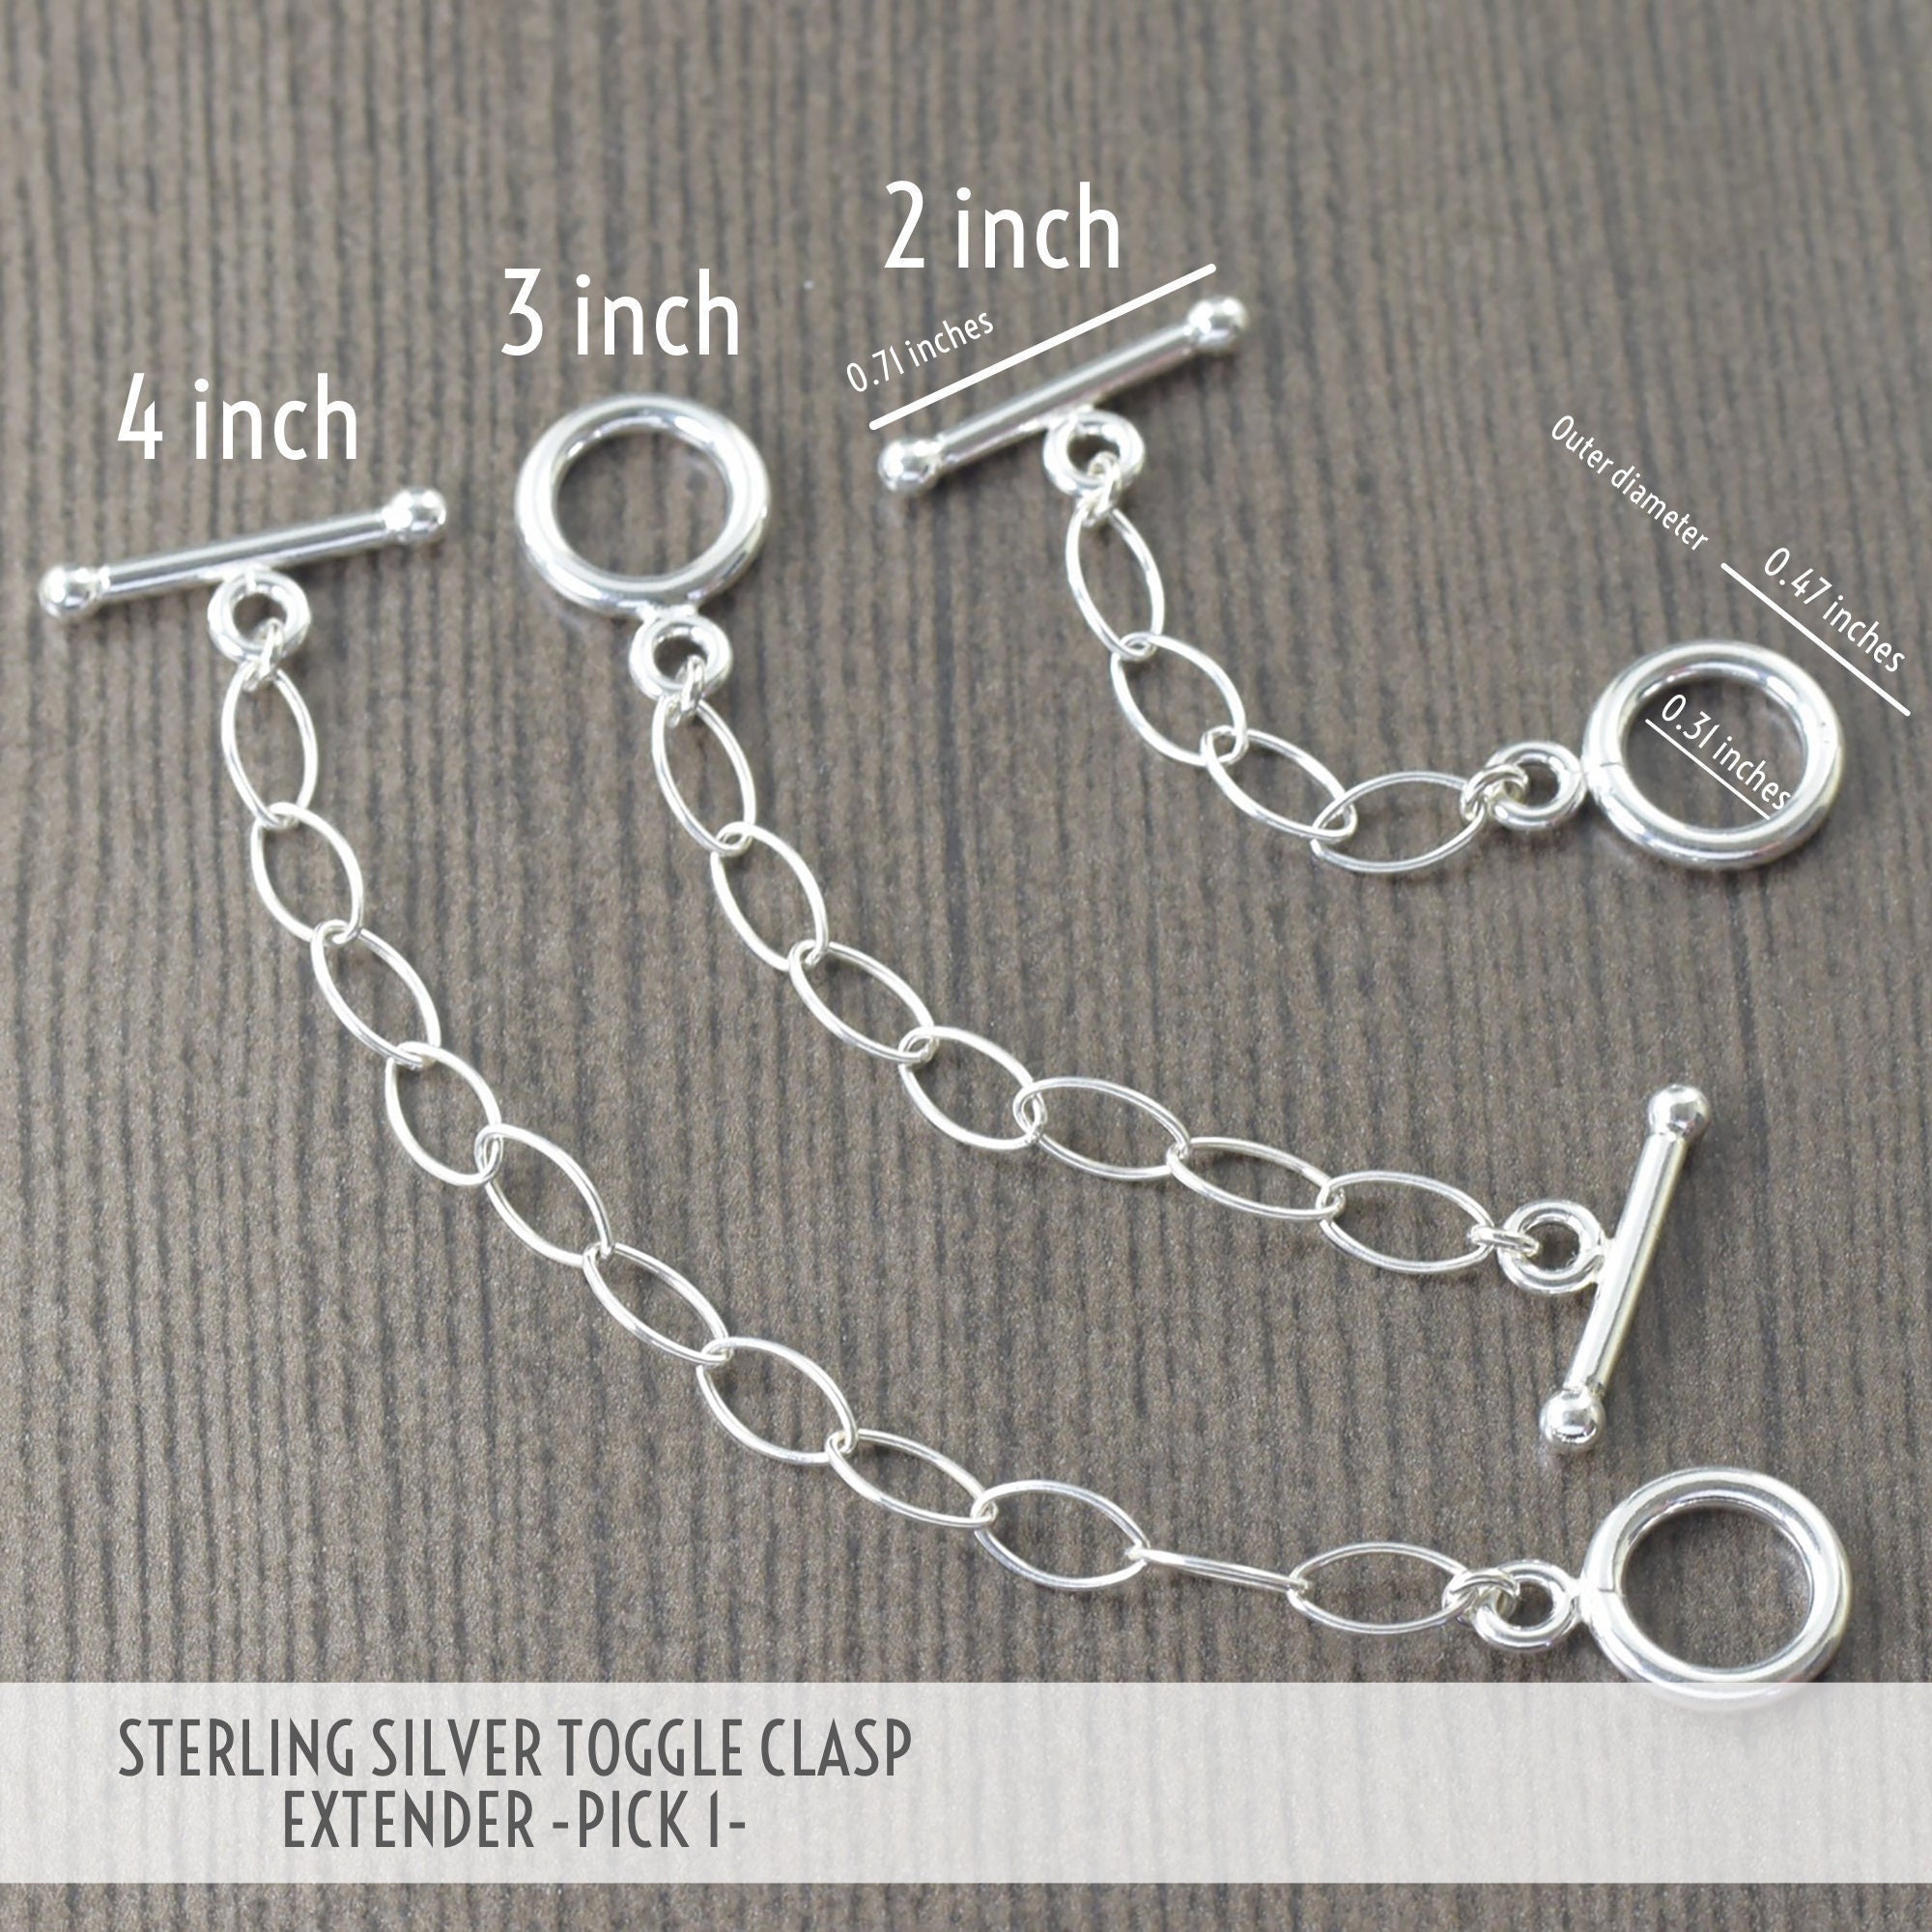 Body Chain or Necklace Extender, Jewelry Extension Sterling Silver